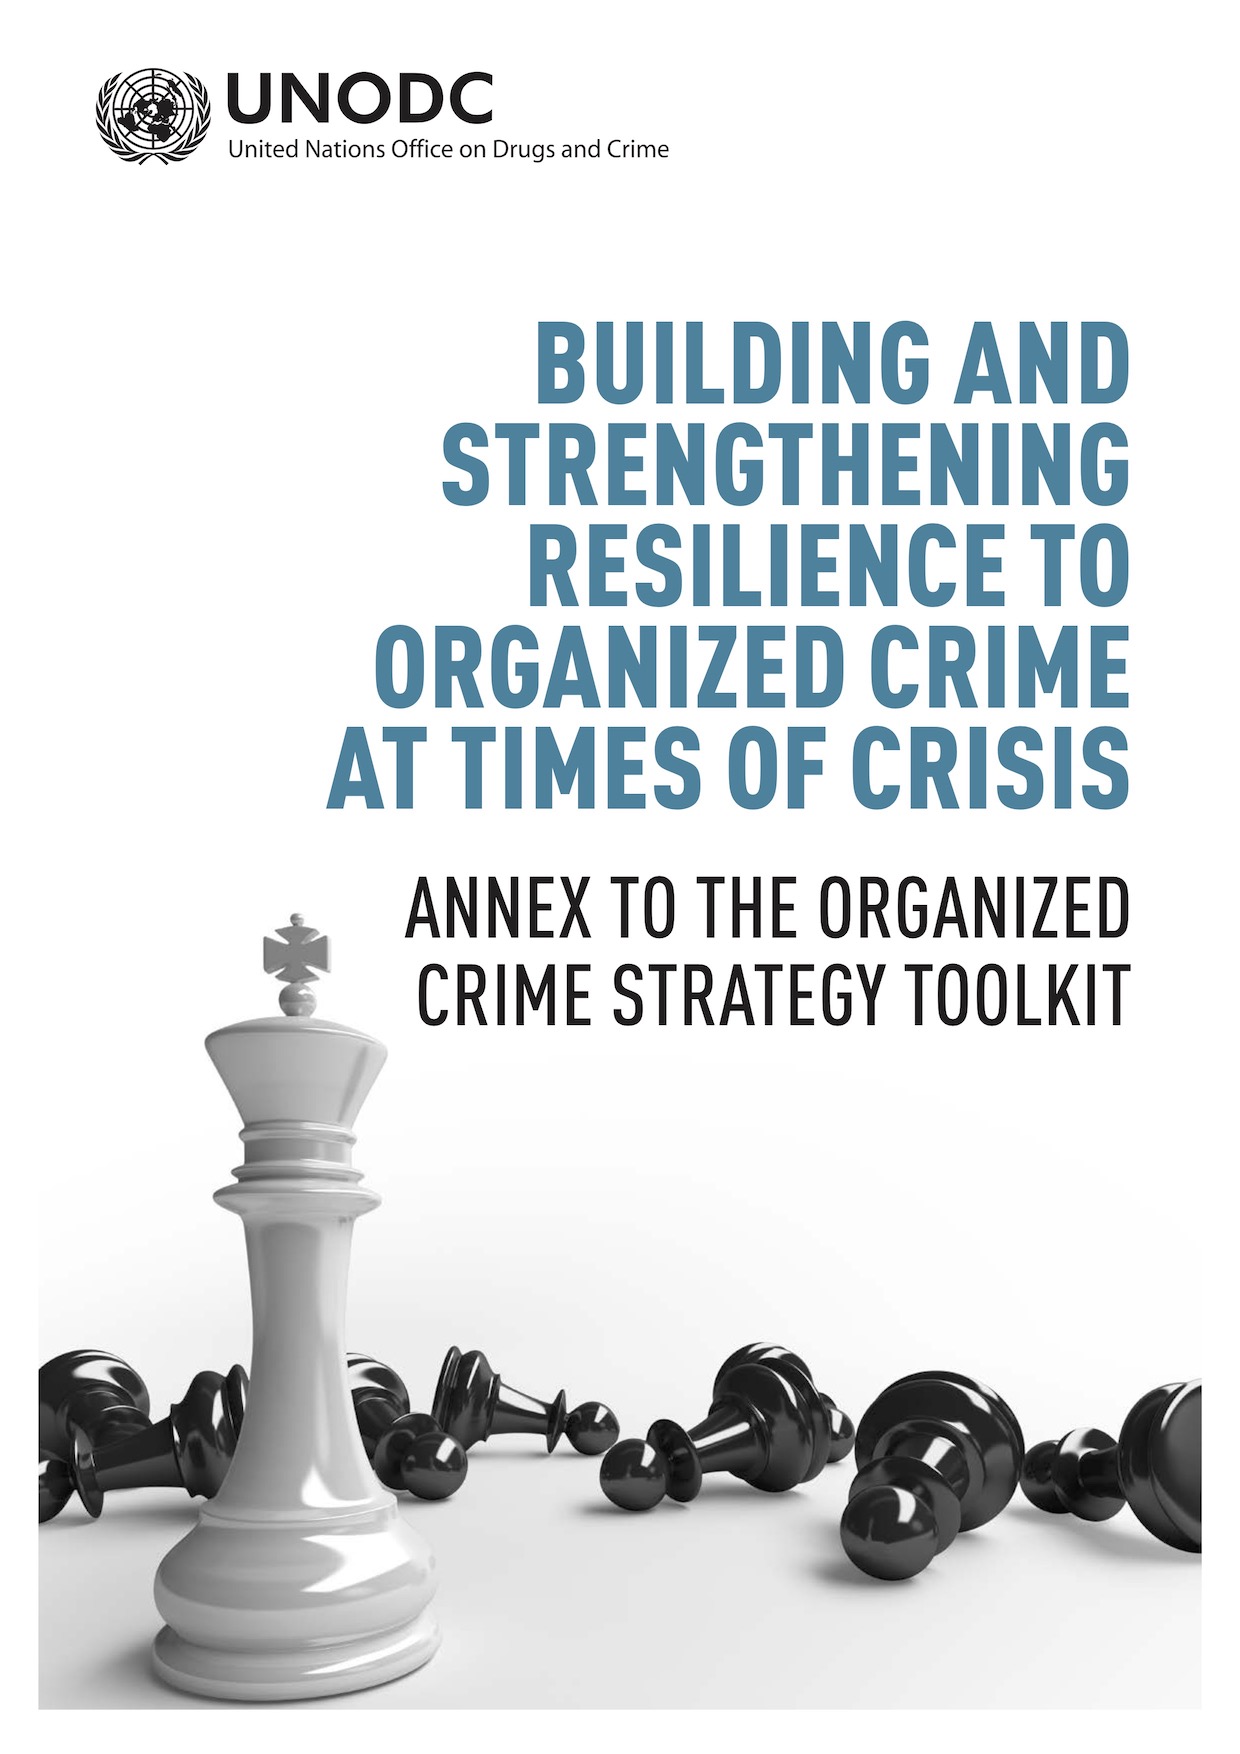 Cover page of the UNODC publication “Building and Strengthening Resilience to Organized Crime at Times of Crisis - Annex to the Organized Crime Strategy Toolkit”.